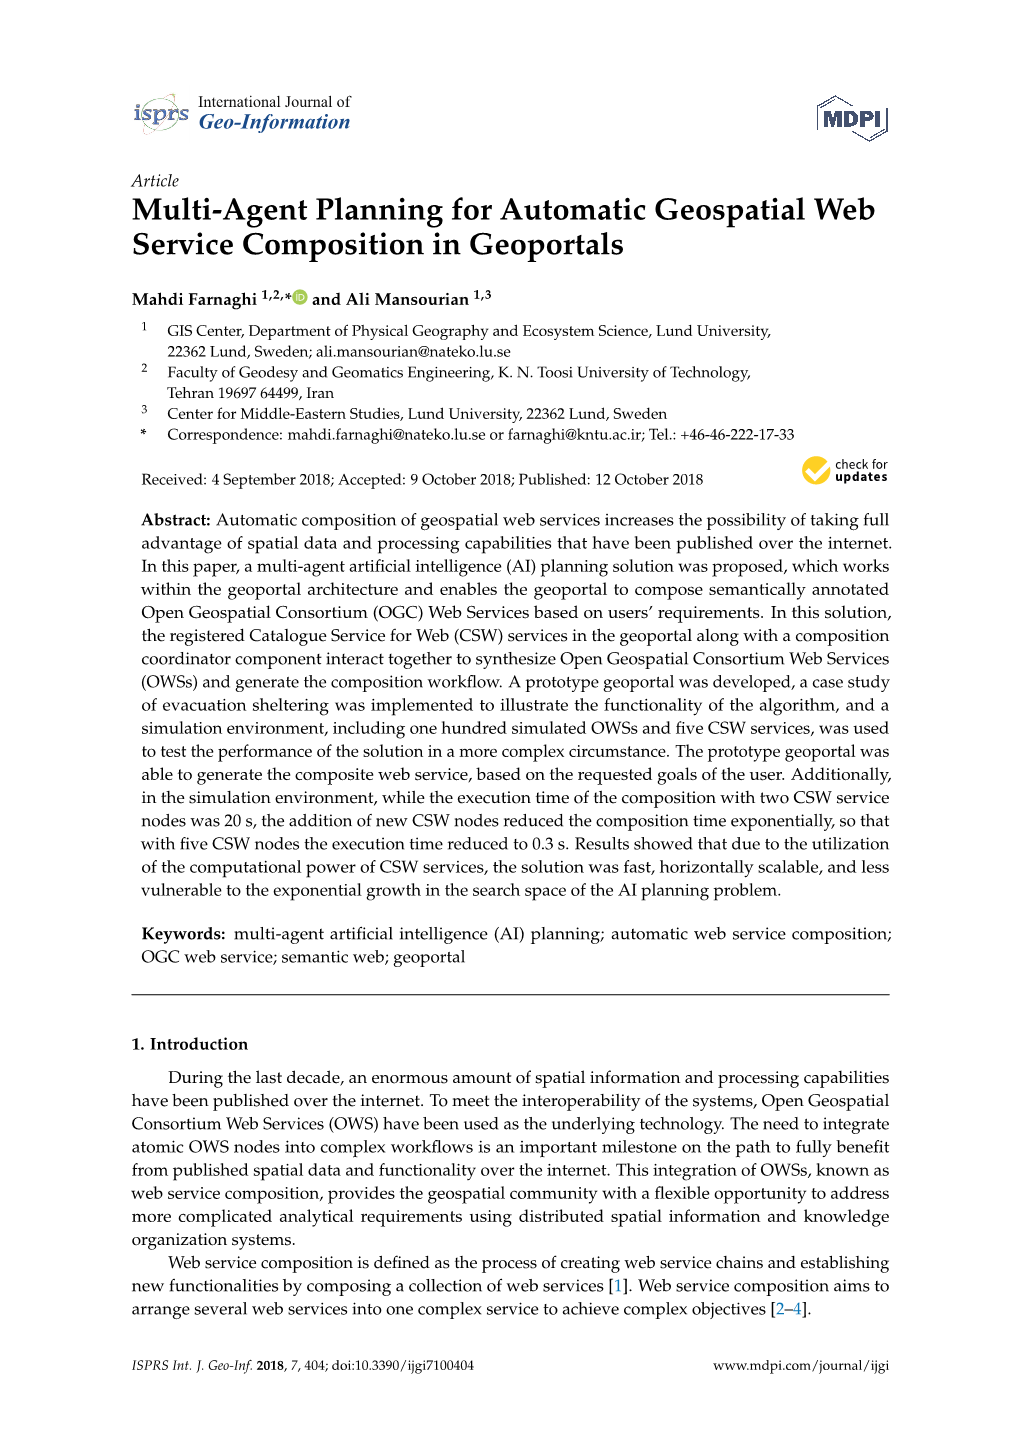 Multi-Agent Planning for Automatic Geospatial Web Service Composition in Geoportals